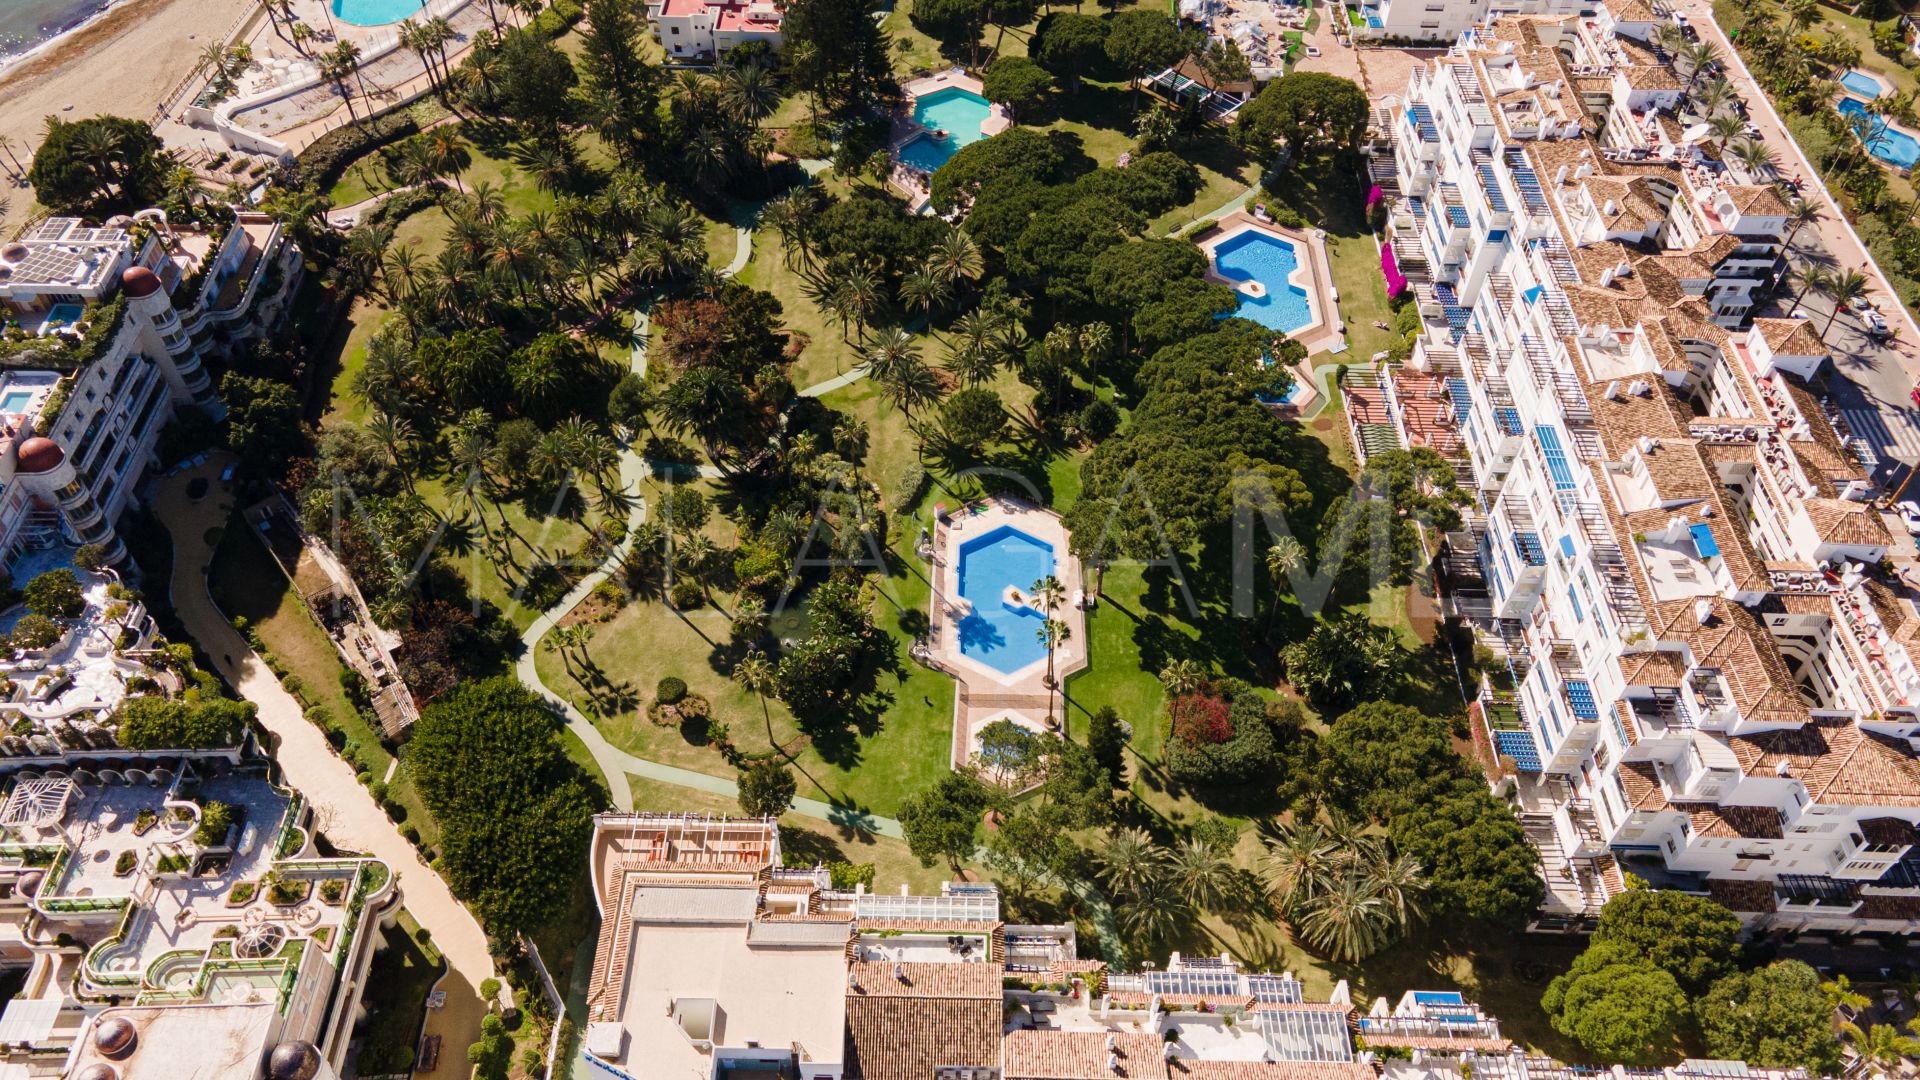 Appartement for sale in Playas del Duque